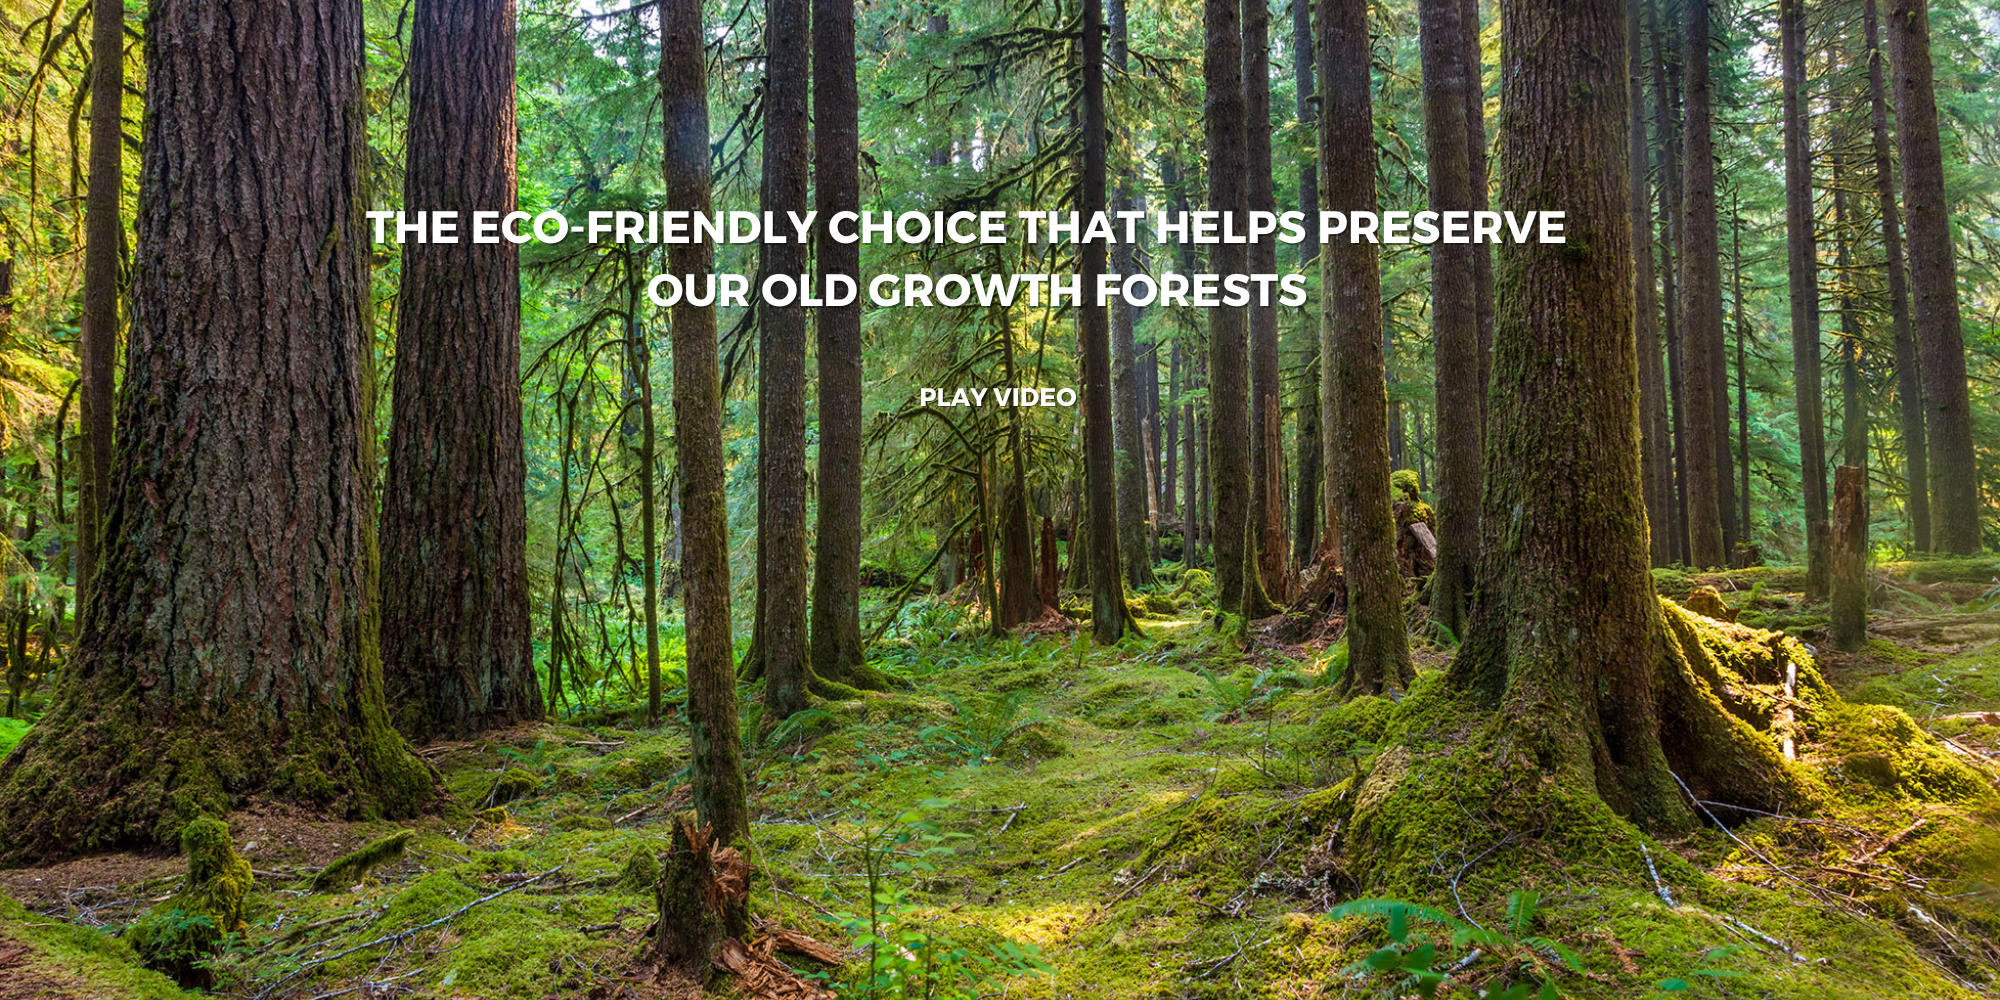 Load video: Old Growth Forest Preservation